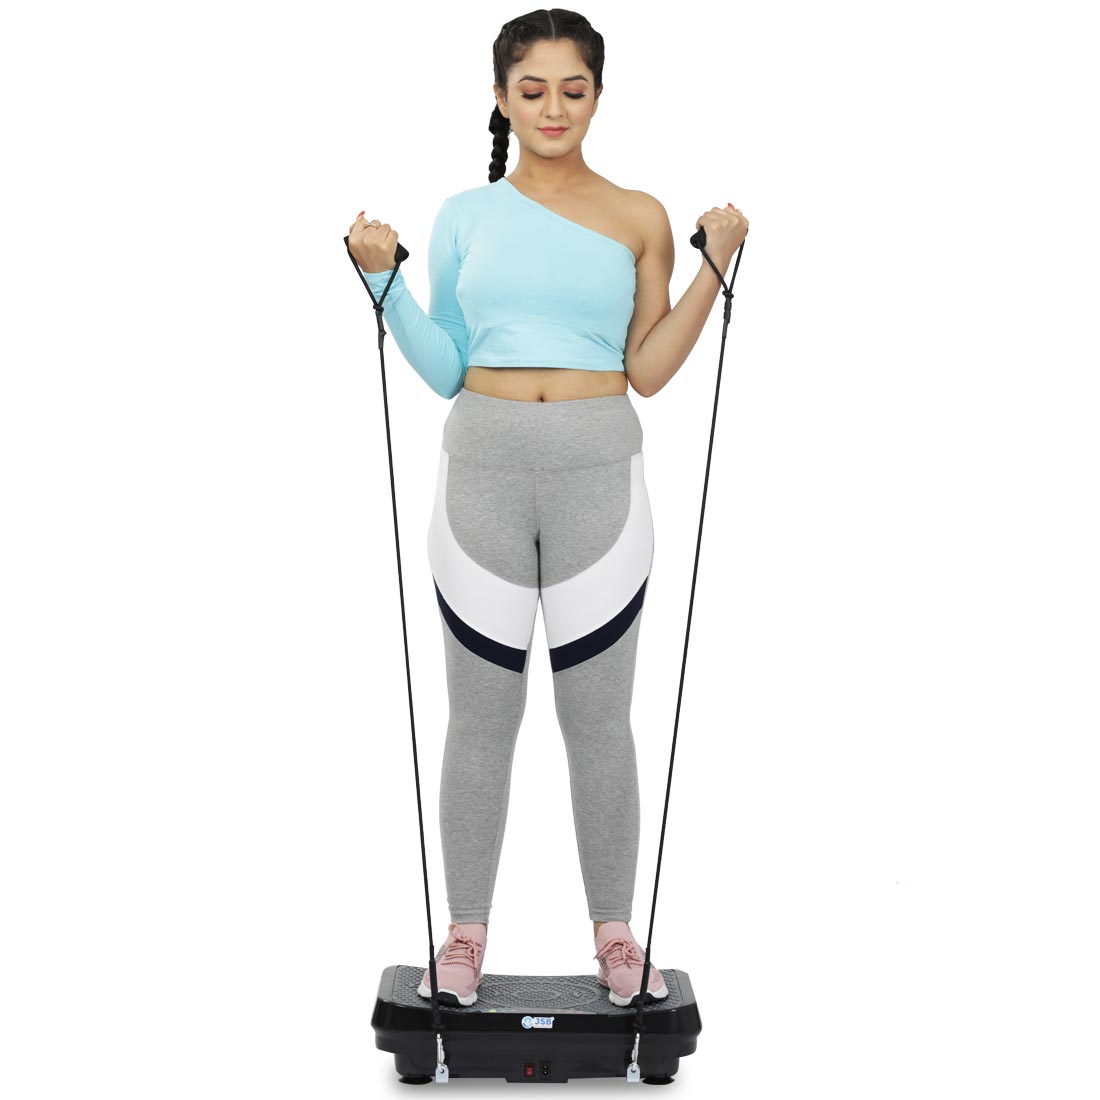 power plate exercise machine 